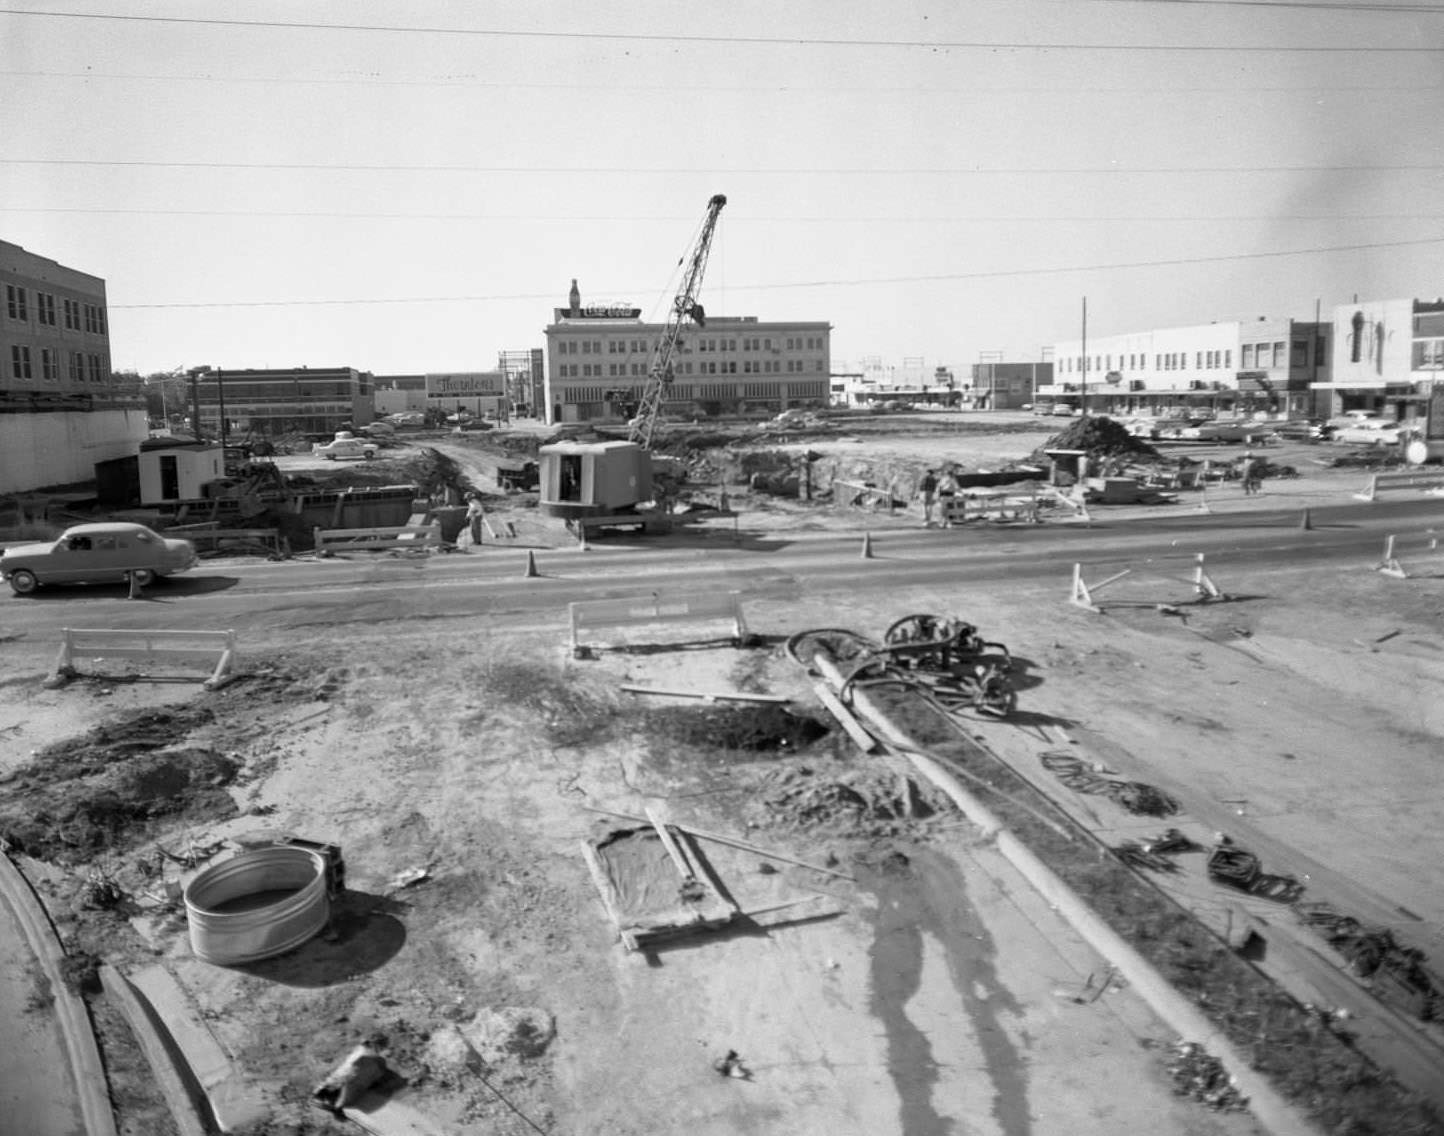 Road Construction at the Underpass, 1957